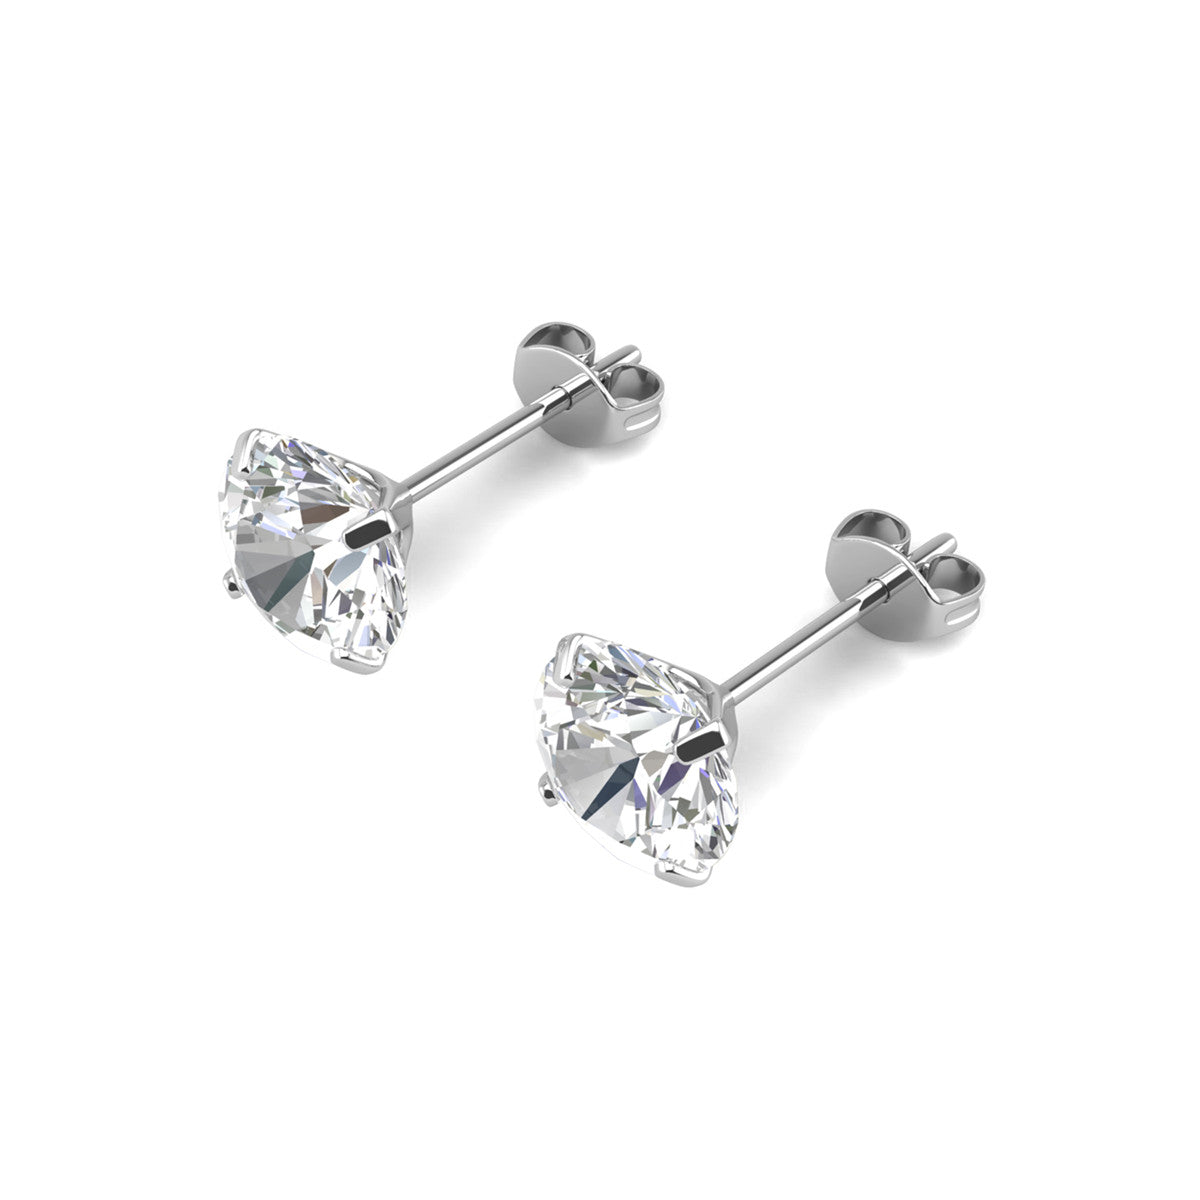 Moissanite by Cate & Chloe Vera Sterling Silver Stud Earrings with Moissanite and 5A Cubic Zirconia Crystals